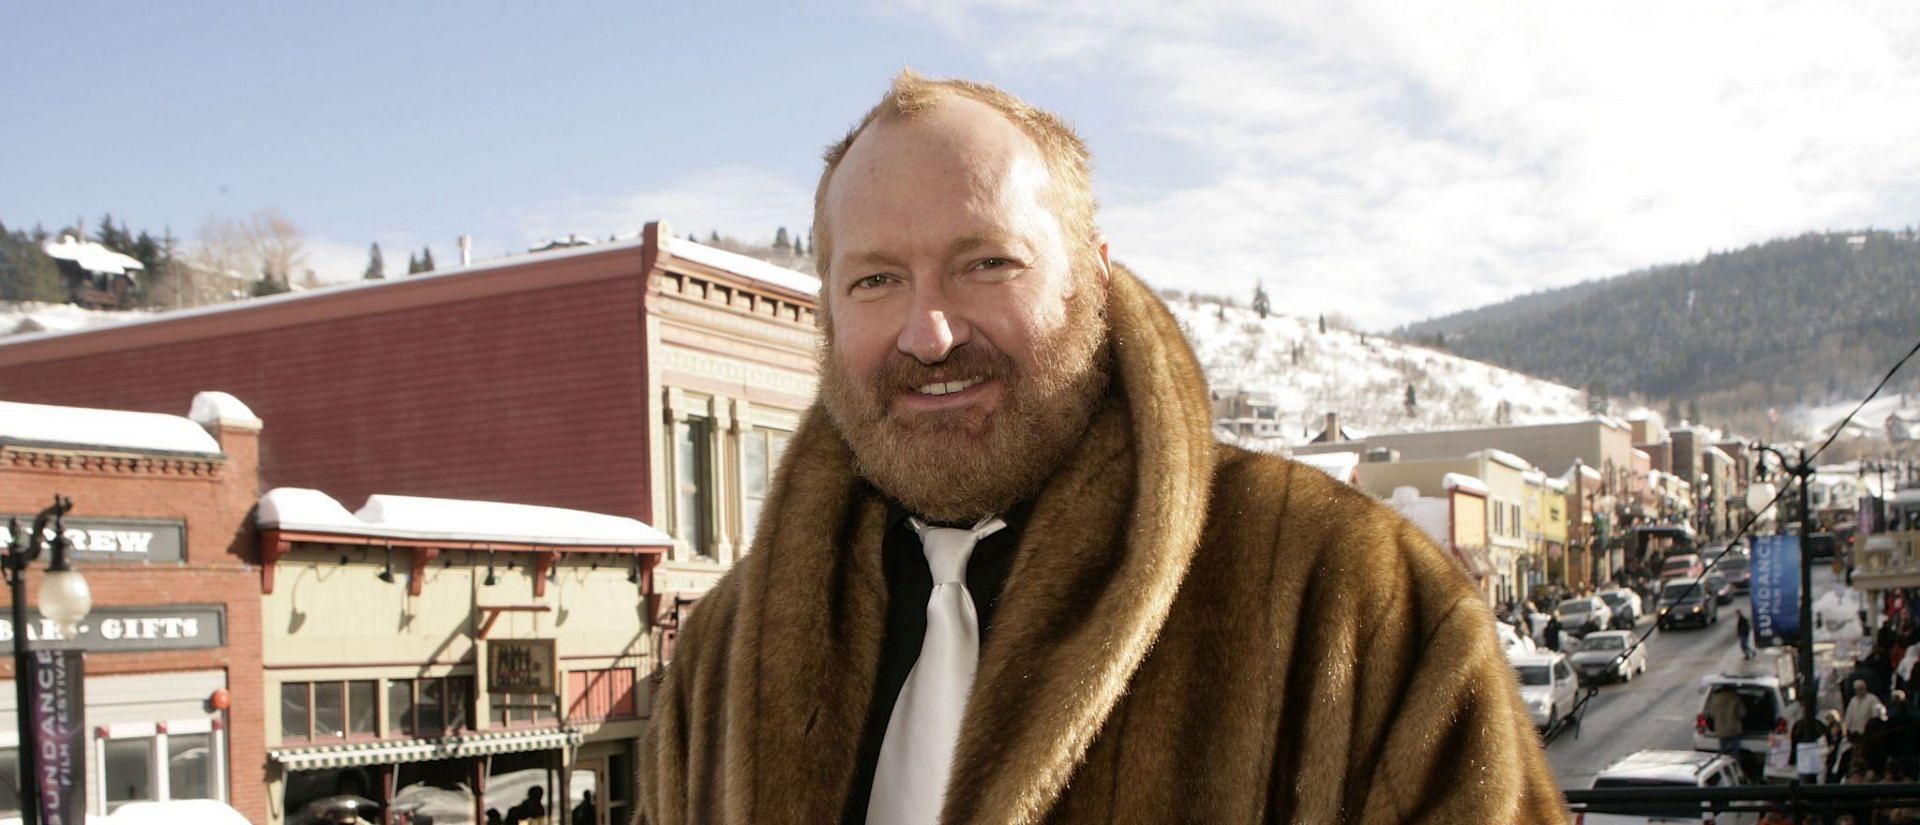 Randy Quaid found himself involved in several legal controversies over the years. (Image via Randall Michelson/WireImage)